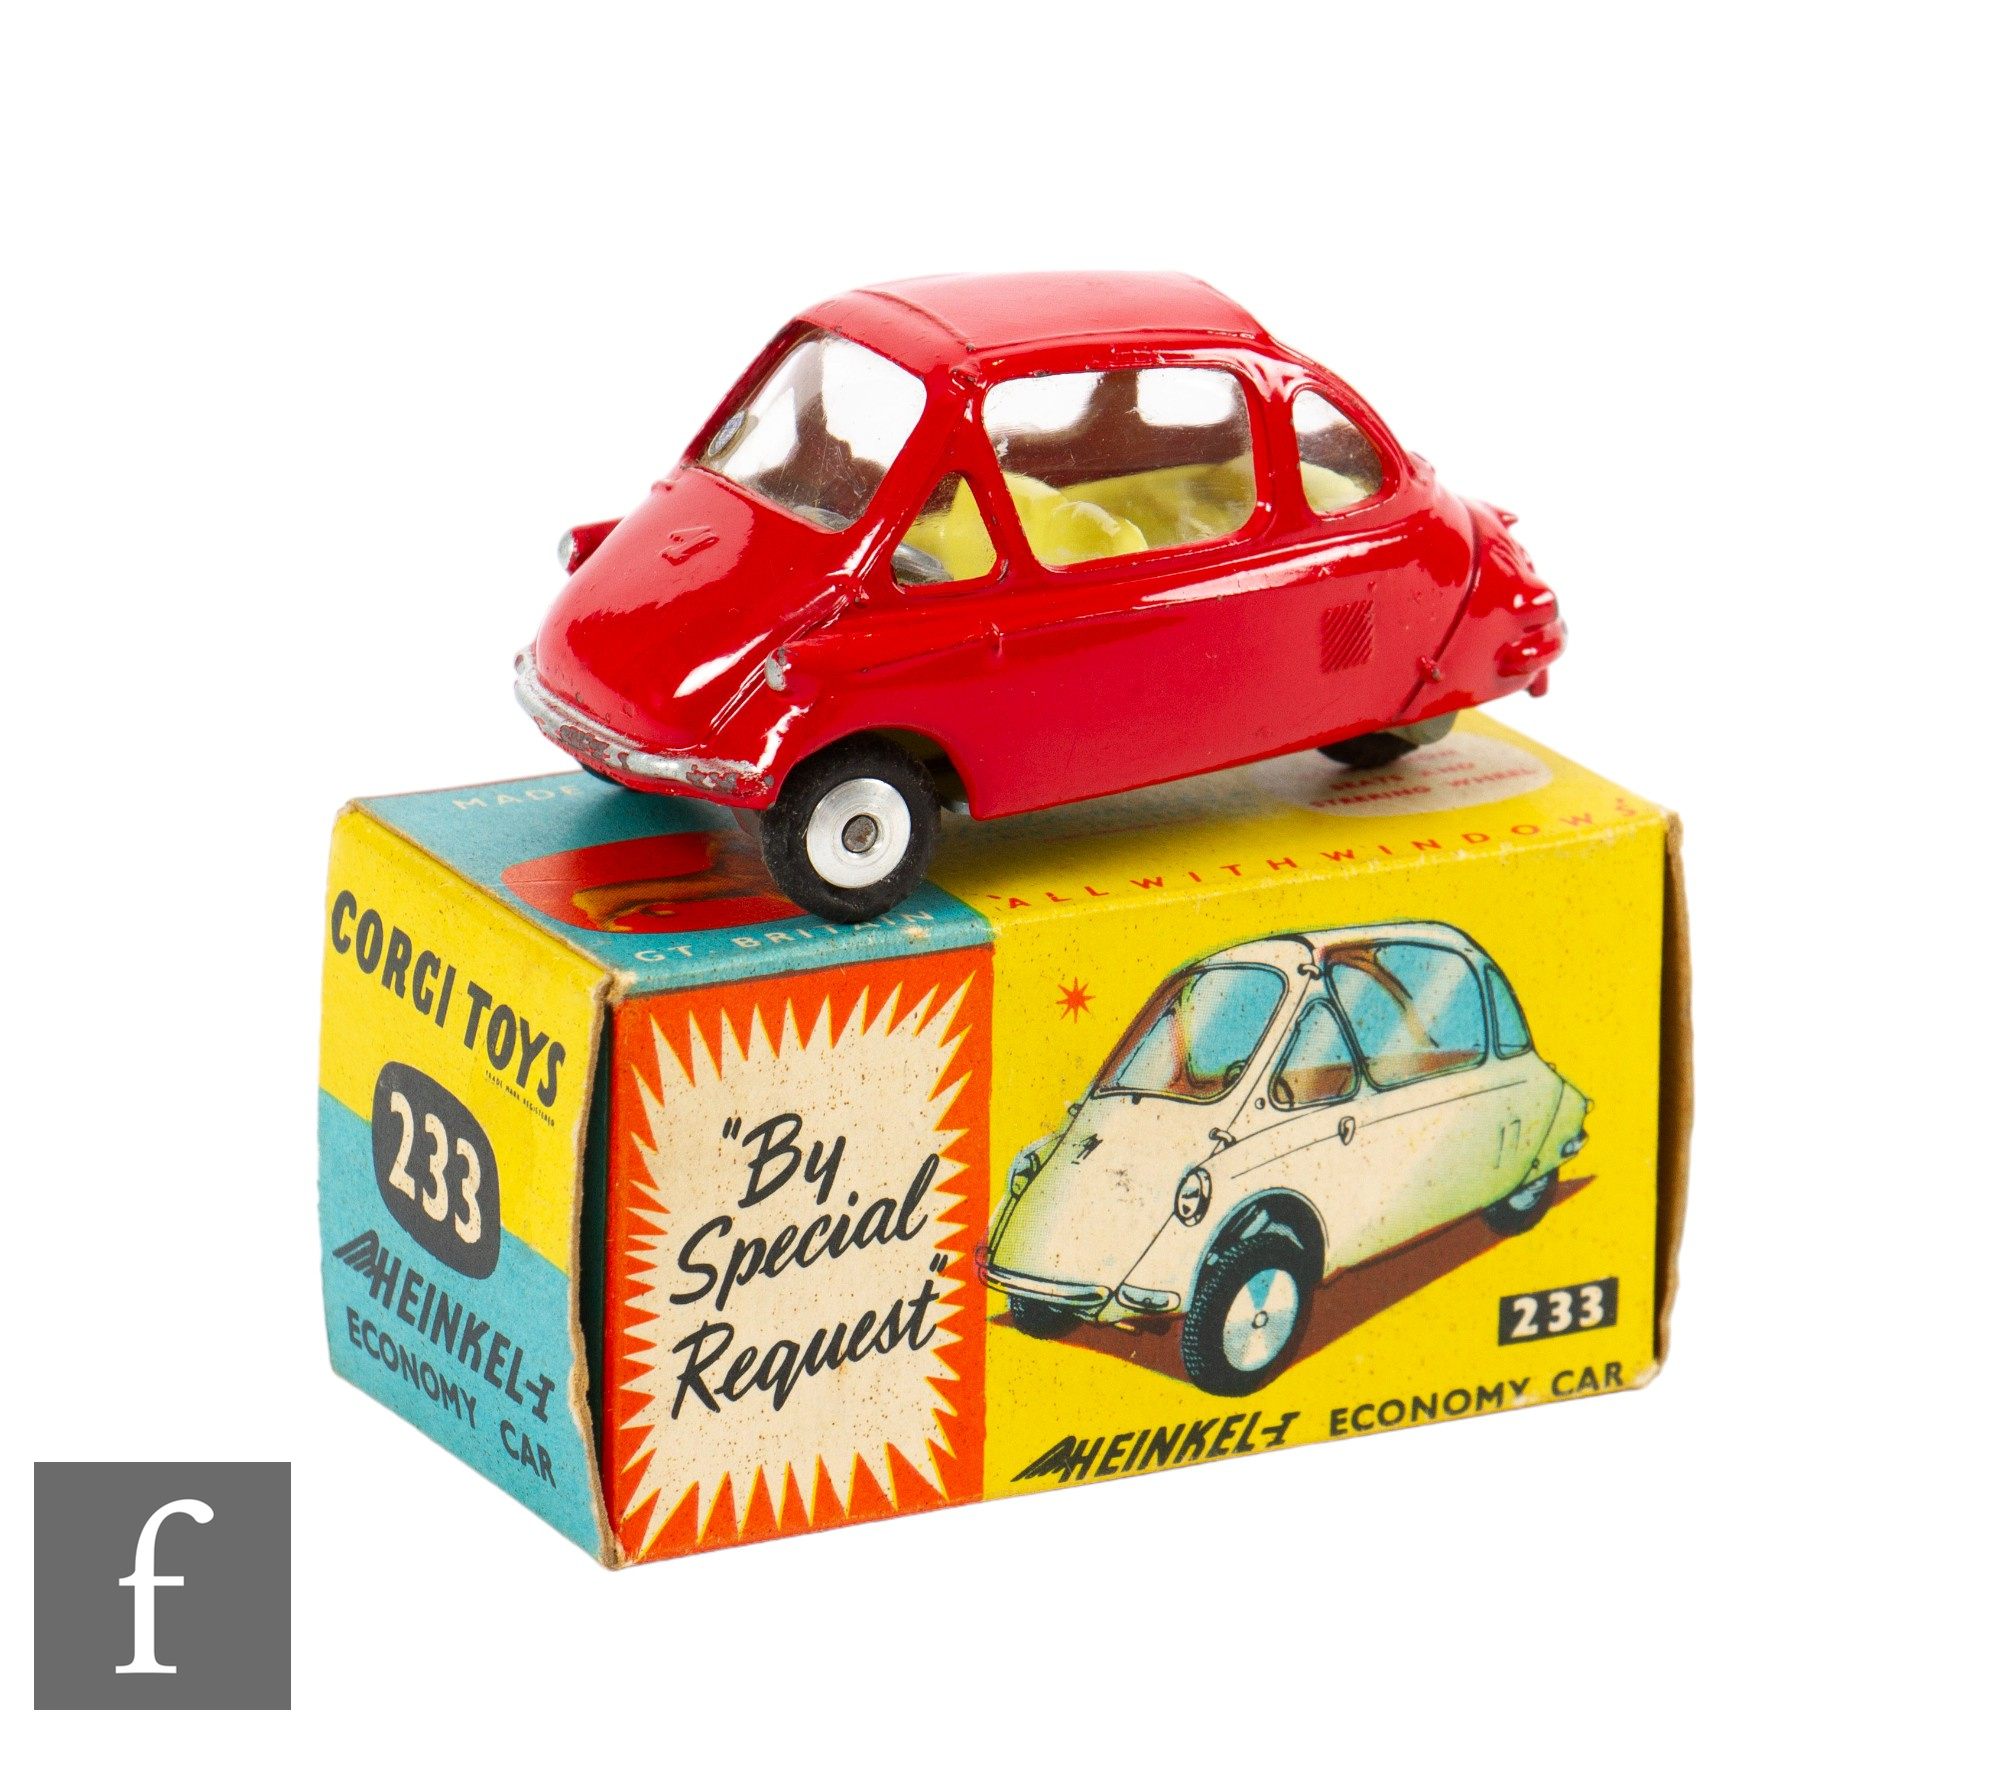 A Corgi 233 Heinkel Economy Car in red with lemon interior and flat spun hubs, boxed.